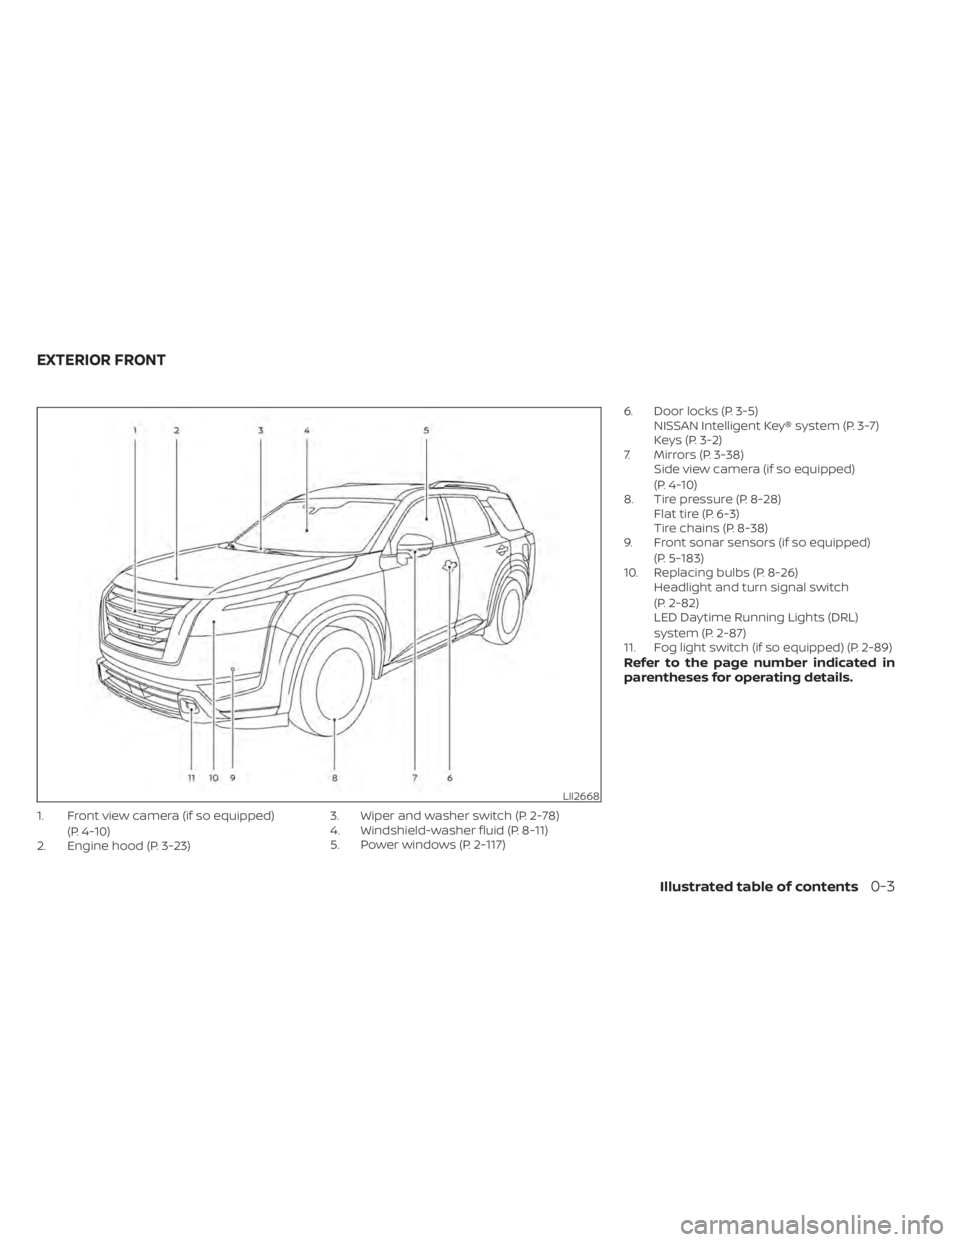 NISSAN PATHFINDER 2023  Owners Manual 1. Front view camera (if so equipped)(P. 4-10)
2. Engine hood (P. 3-23) 3. Wiper and washer switch (P. 2-78)
4. Windshield-washer fluid (P. 8-11)
5. Power windows (P. 2-117)6. Door locks (P. 3-5)
NISS